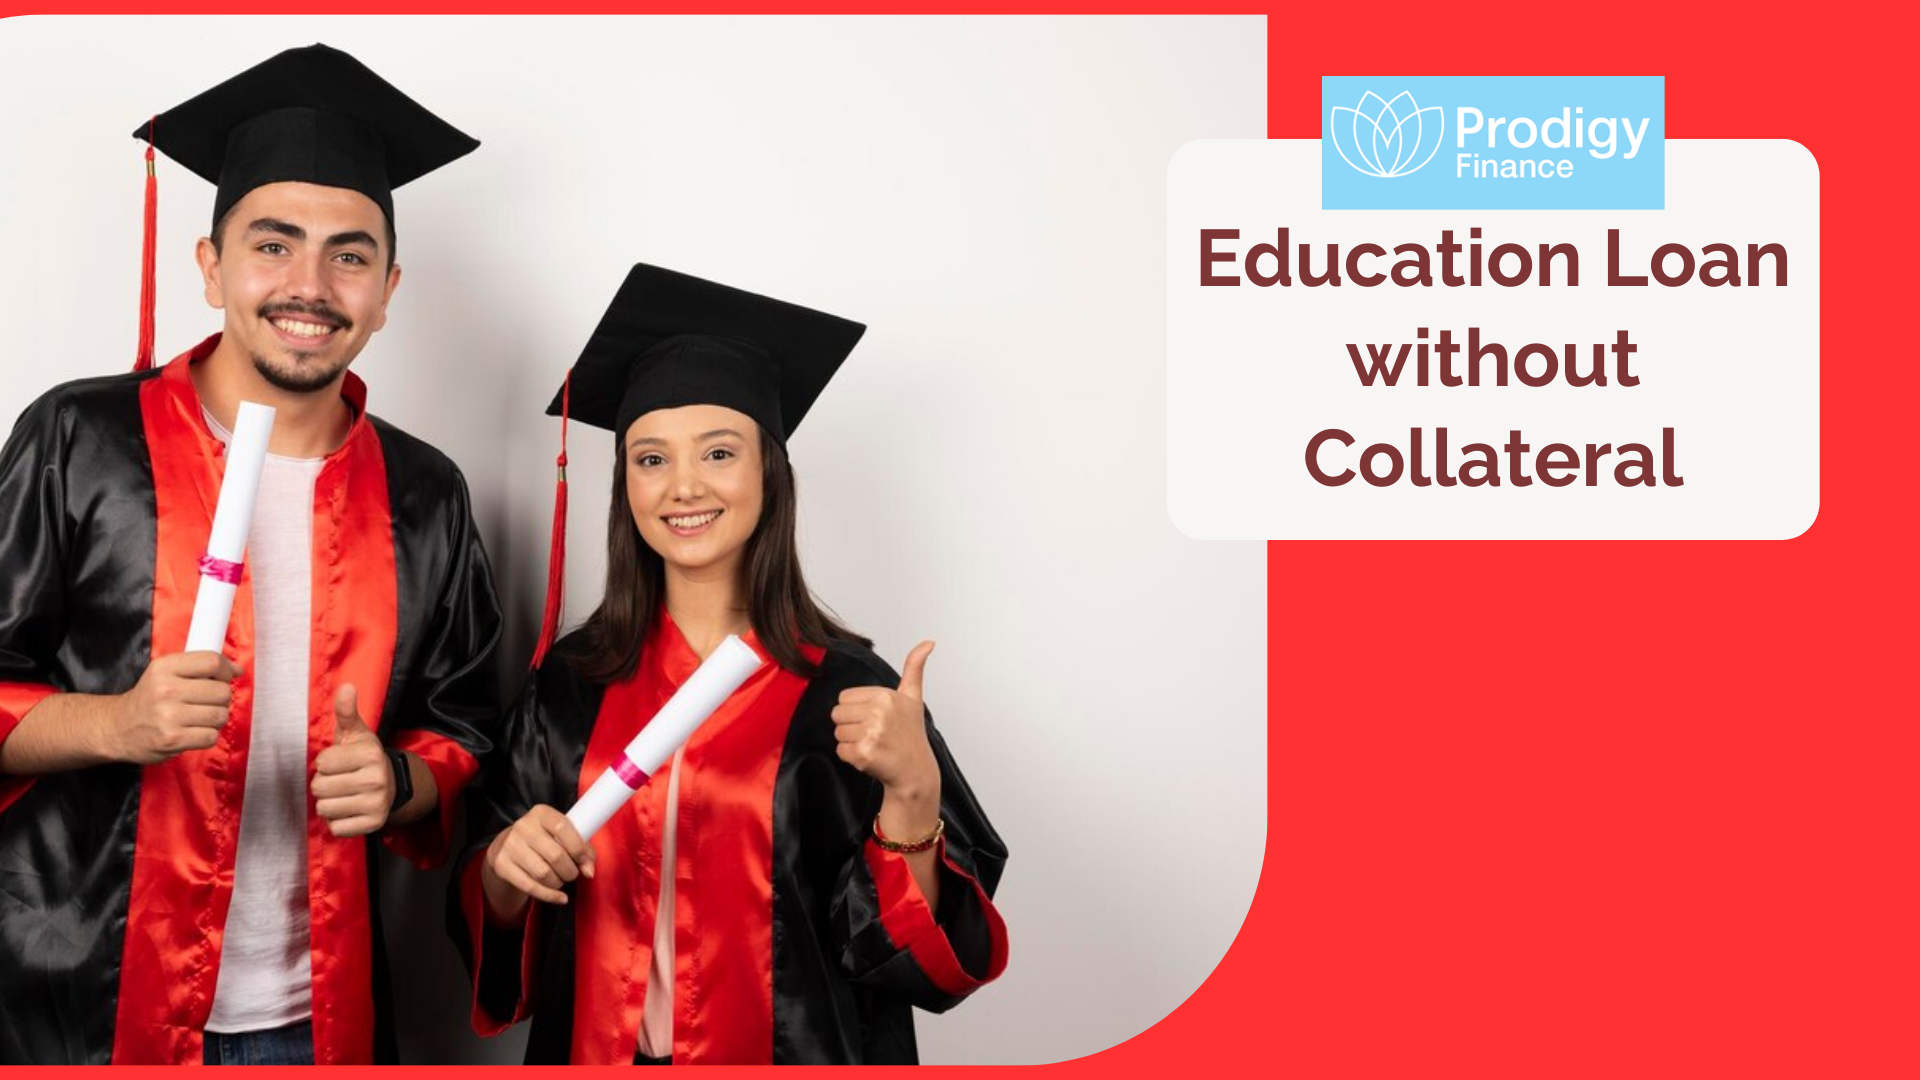 Prodigy Finance education loan without collateral